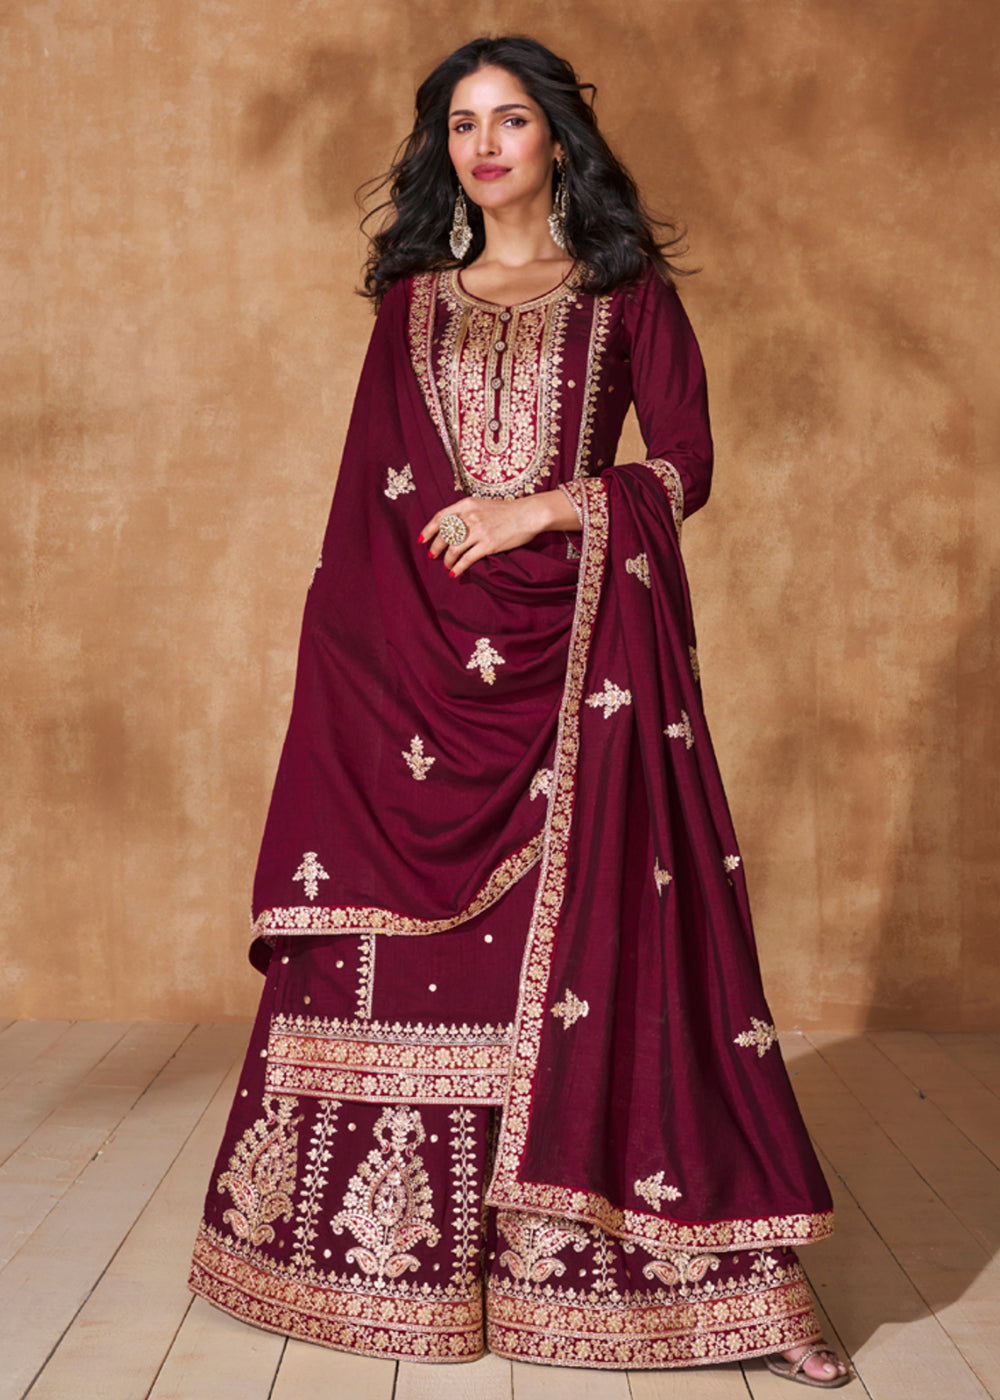 Buy Now Lovely Wine Premium Silk Designer Palazzo Style Suit Online in USA, UK, Canada, Germany, Australia & Worldwide at Empress Clothing. 